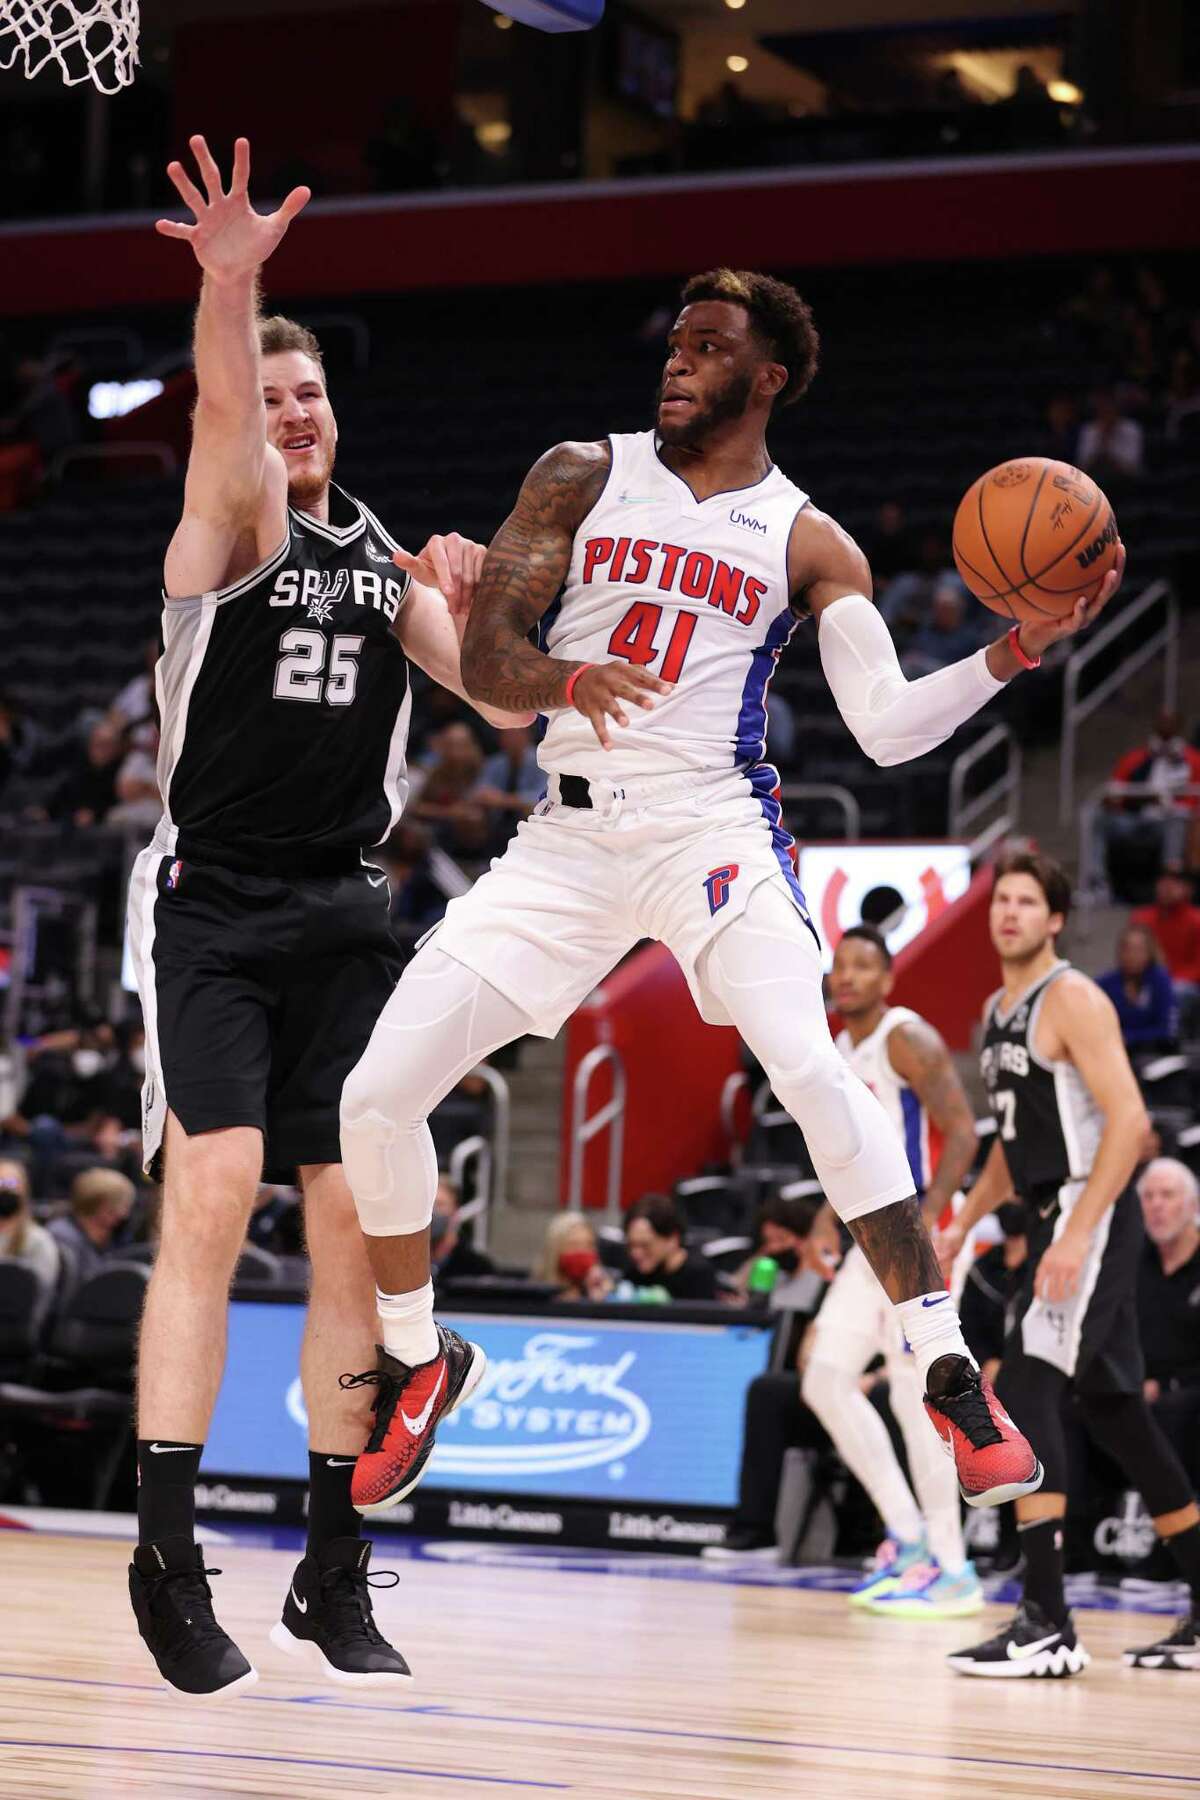 DETROIT, MICHIGAN - OCTOBER 06: Saddiq Bey #41 of the Detroit Pistons passes away from Jakob Poeltl #25 of the San Antonio Spurs during a preseason game at Little Caesars Arena on October 06, 2021 in Detroit, Michigan. NOTE TO USER: User expressly acknowledges and agrees that, by downloading and or using this photograph, User is consenting to the terms and conditions of the Getty Images License Agreement. (Photo by Gregory Shamus/Getty Images)